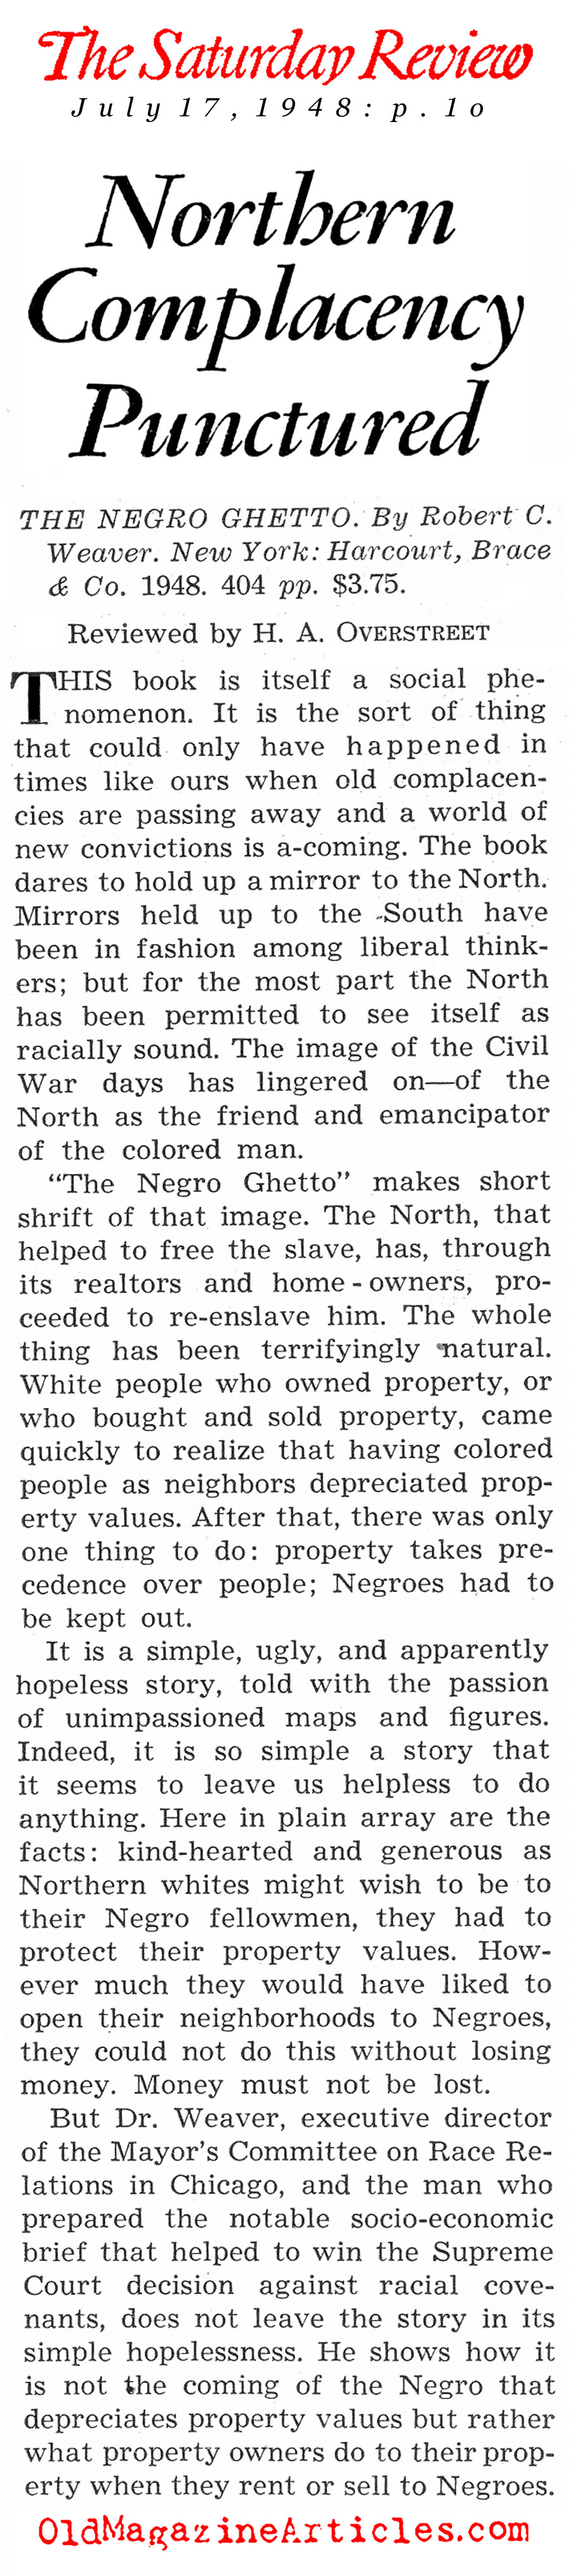 The Creation of the Ghettos (The Saturday Review, 1948)